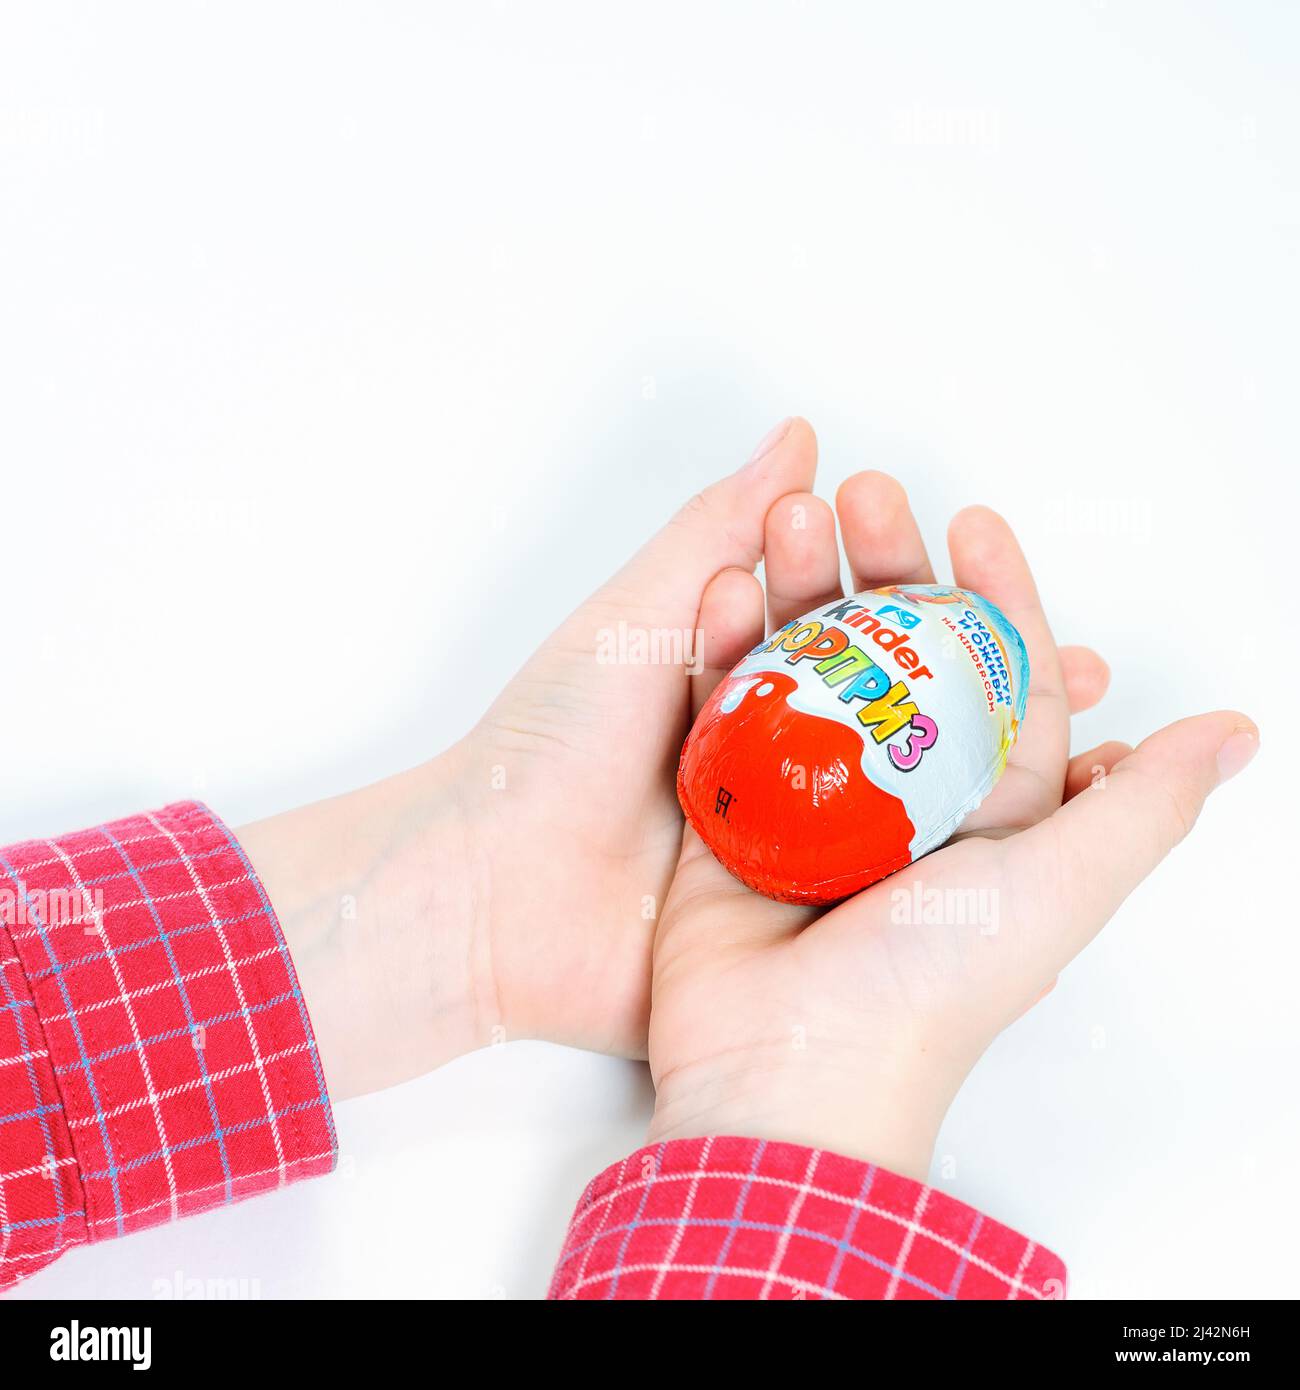 Kinder joy hi-res stock photography and images - Alamy